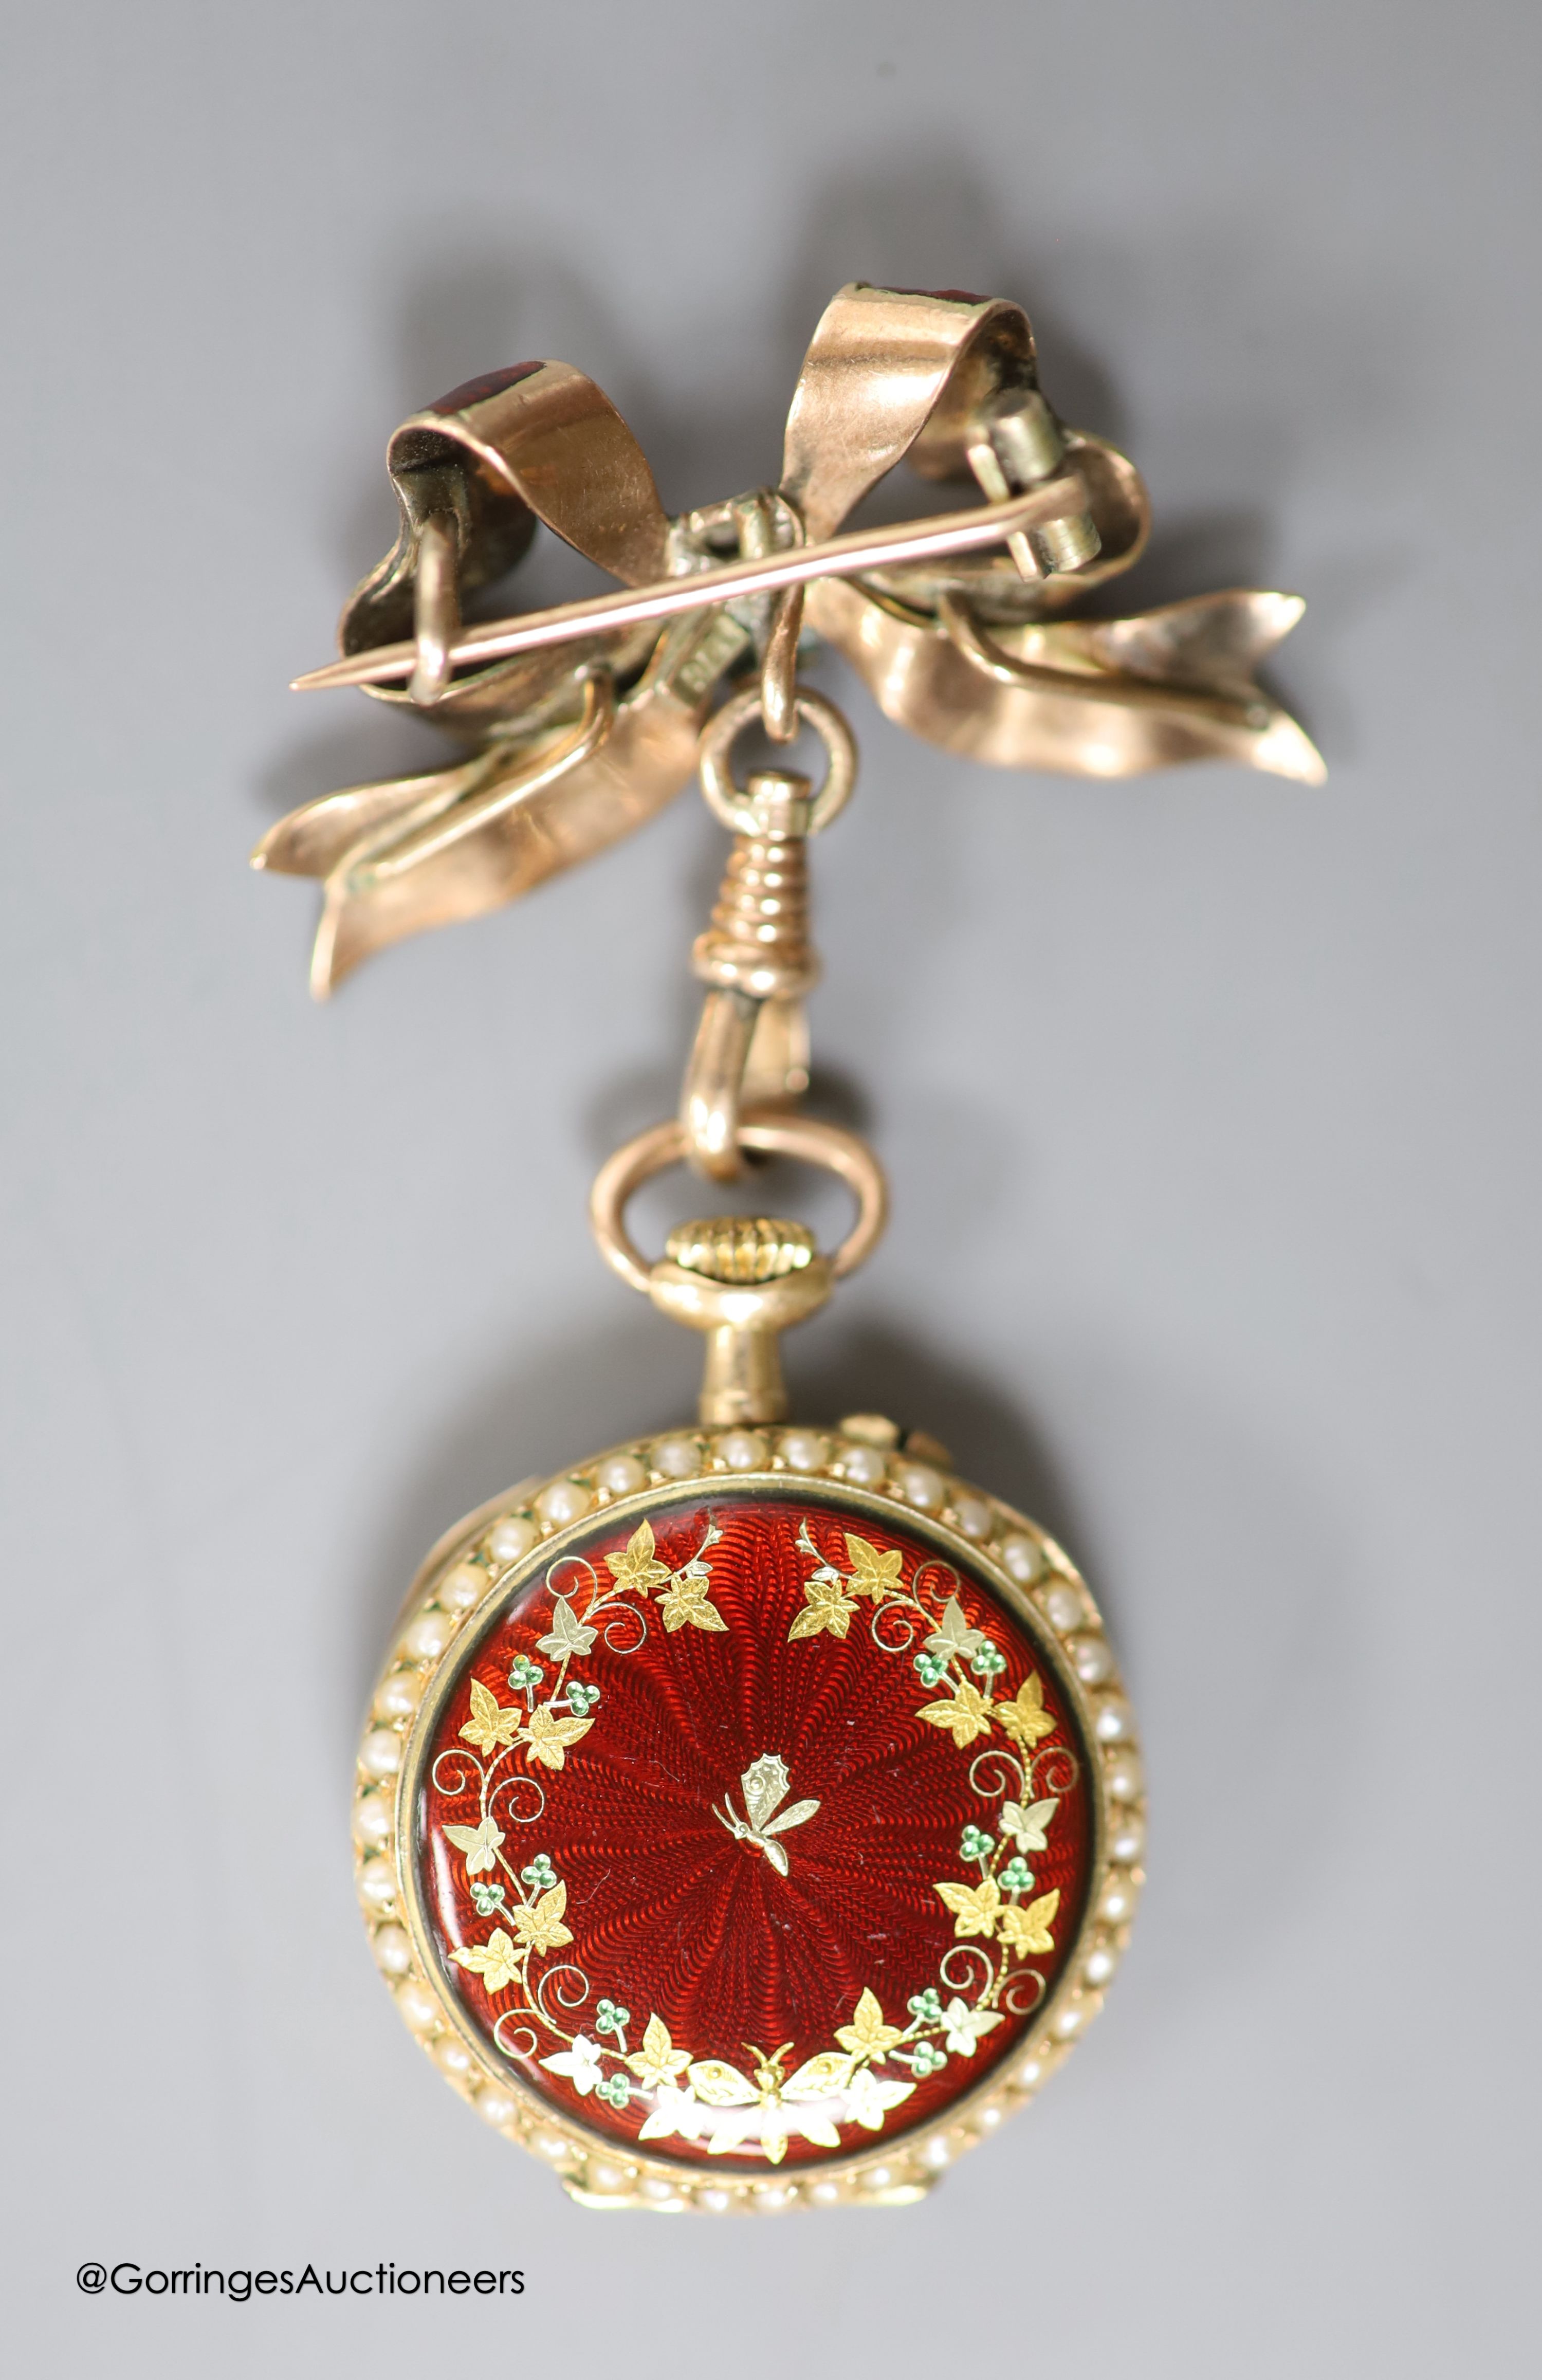 A lady's early 20th century 14k yellow metal, red enamel and seed pearl set fob watch(a.f.), case diameter 26mm, gross 15.5 grams, on a 9ct and red enamel bow brooch, gross 4.6 grams.